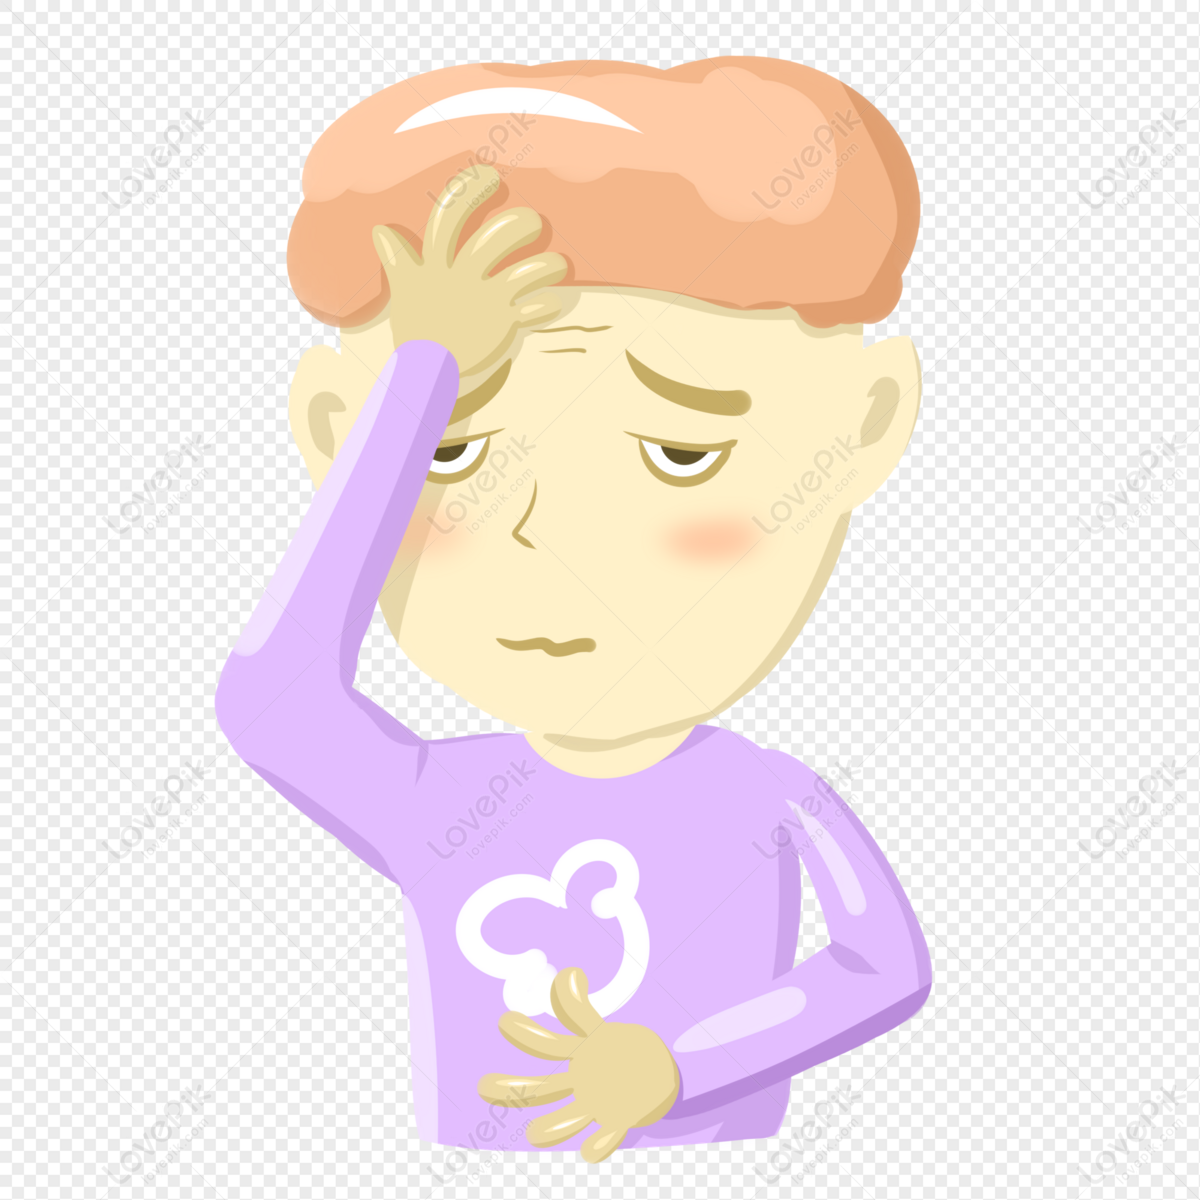 Headache PNG Hd Transparent Image And Clipart Image For Free Download -  Lovepik | 401409194